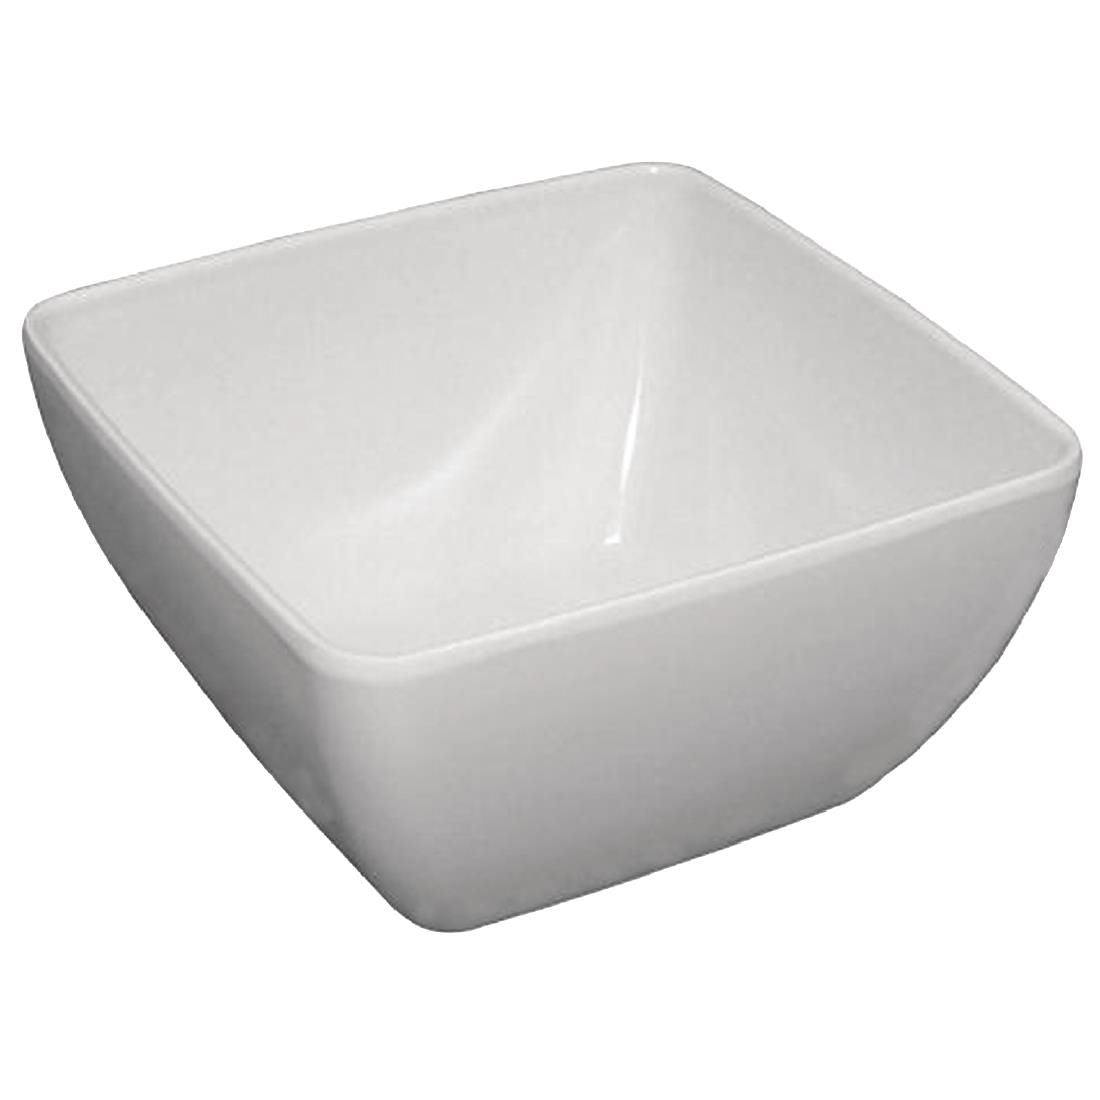 DP144 Curved White Melamine Bowl 8in JD Catering Equipment Solutions Ltd